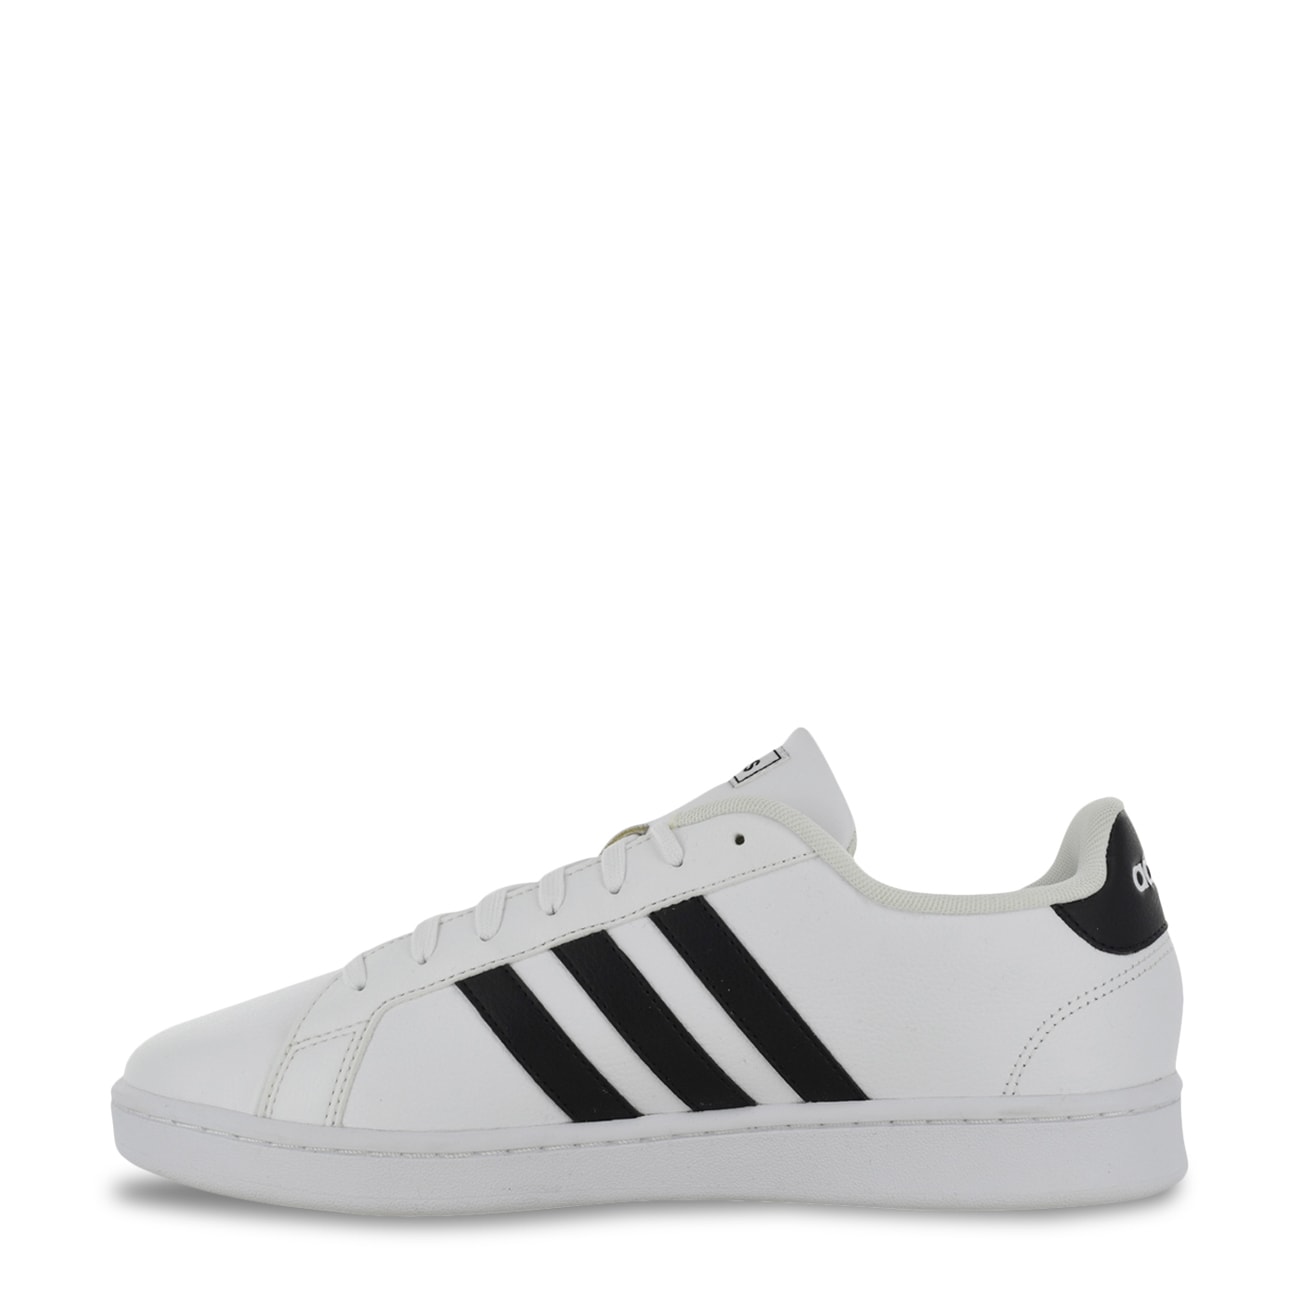 adidas court star shoes